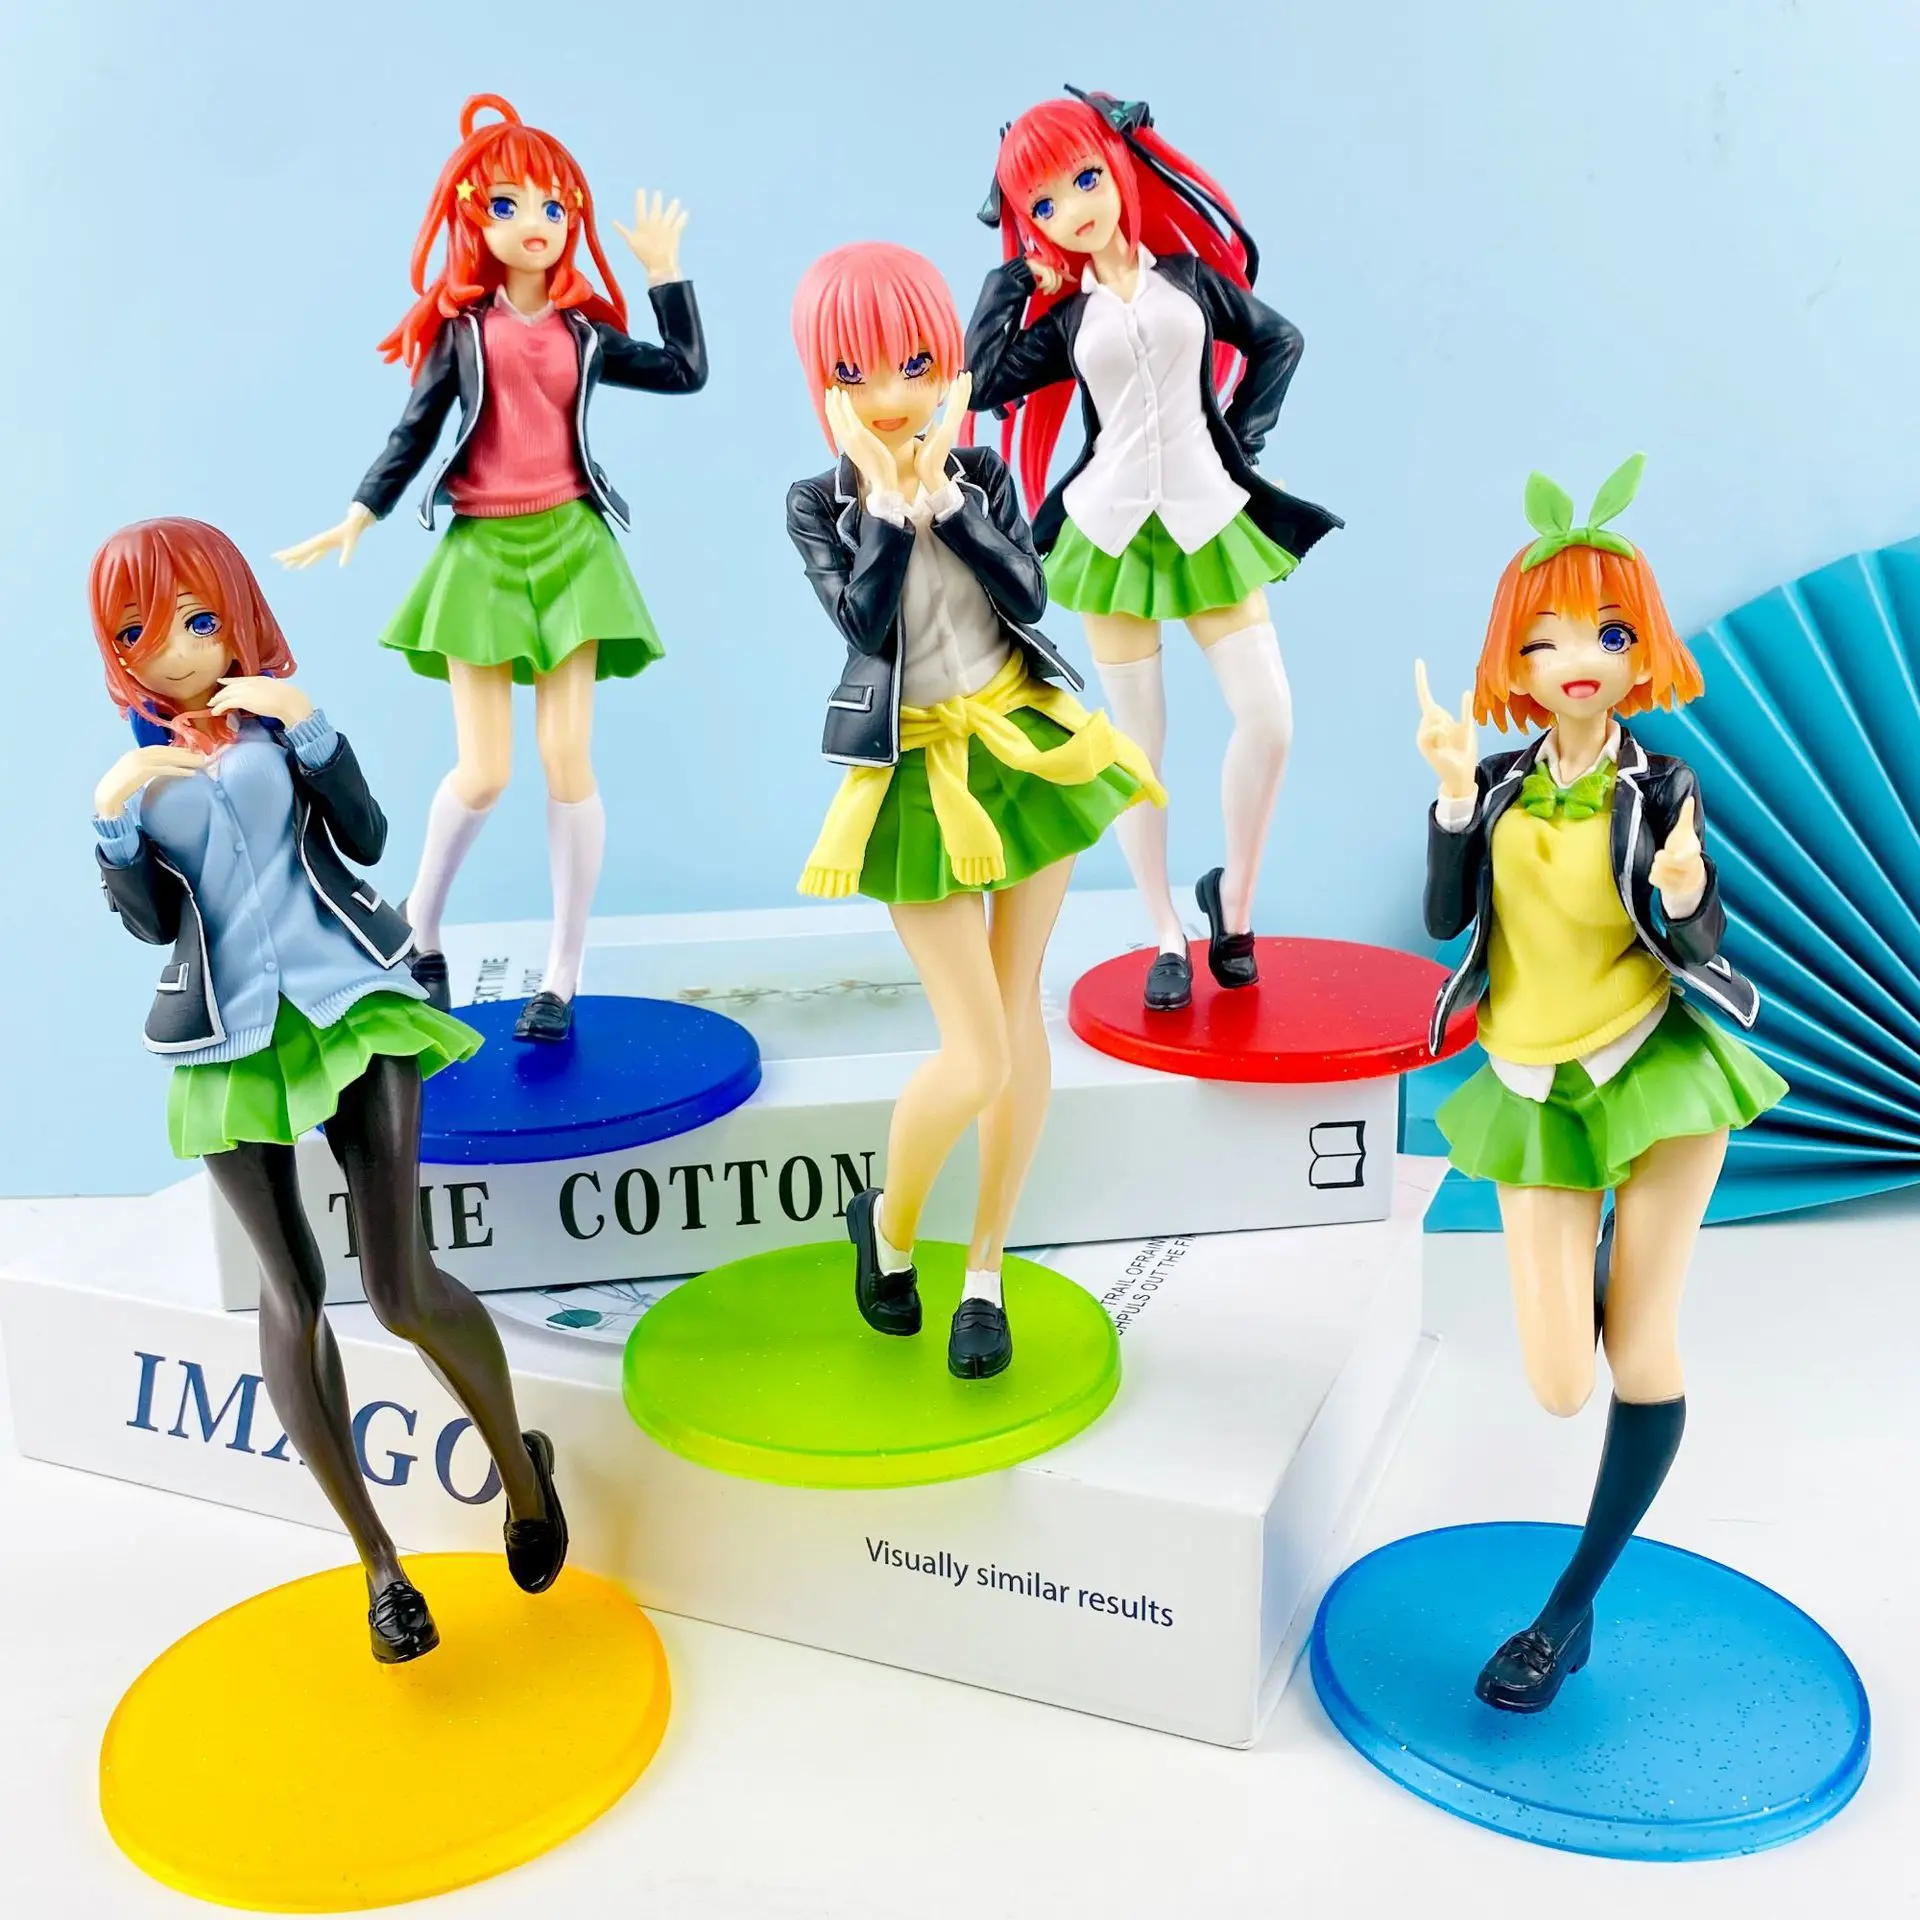 

The Quintessential Quintuplets Figure Campus Style Girls Ichika Nino Miku Pvc Model Doll Toys Cake Decoration Gifts for Children